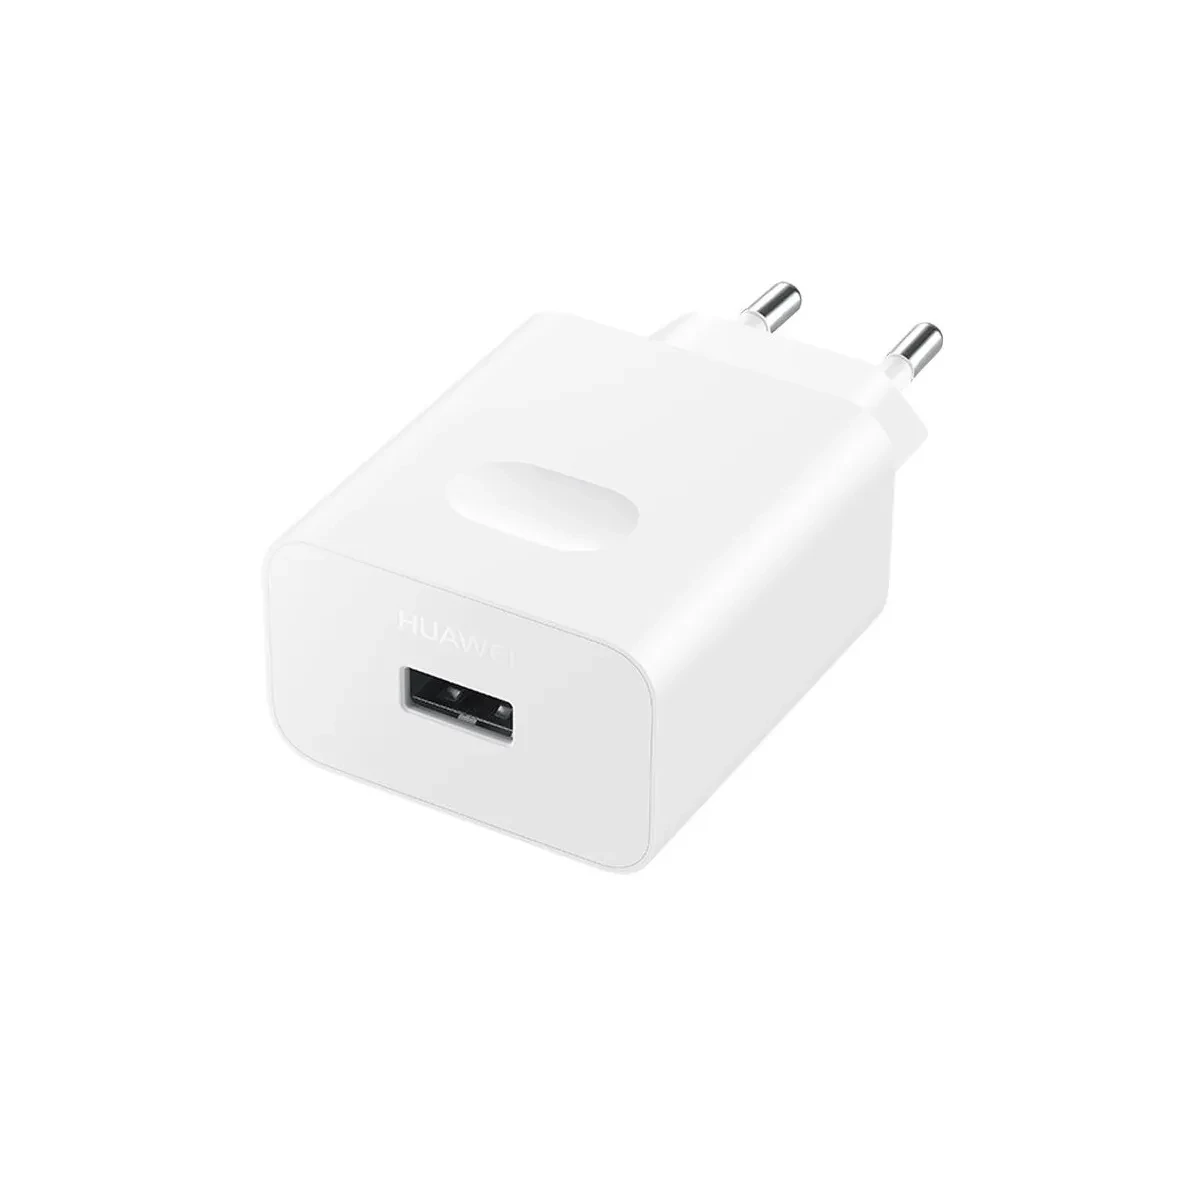 HUAWEI-Adapter 40W Smart High_Voltage Direct Charger,White,Huawei Design